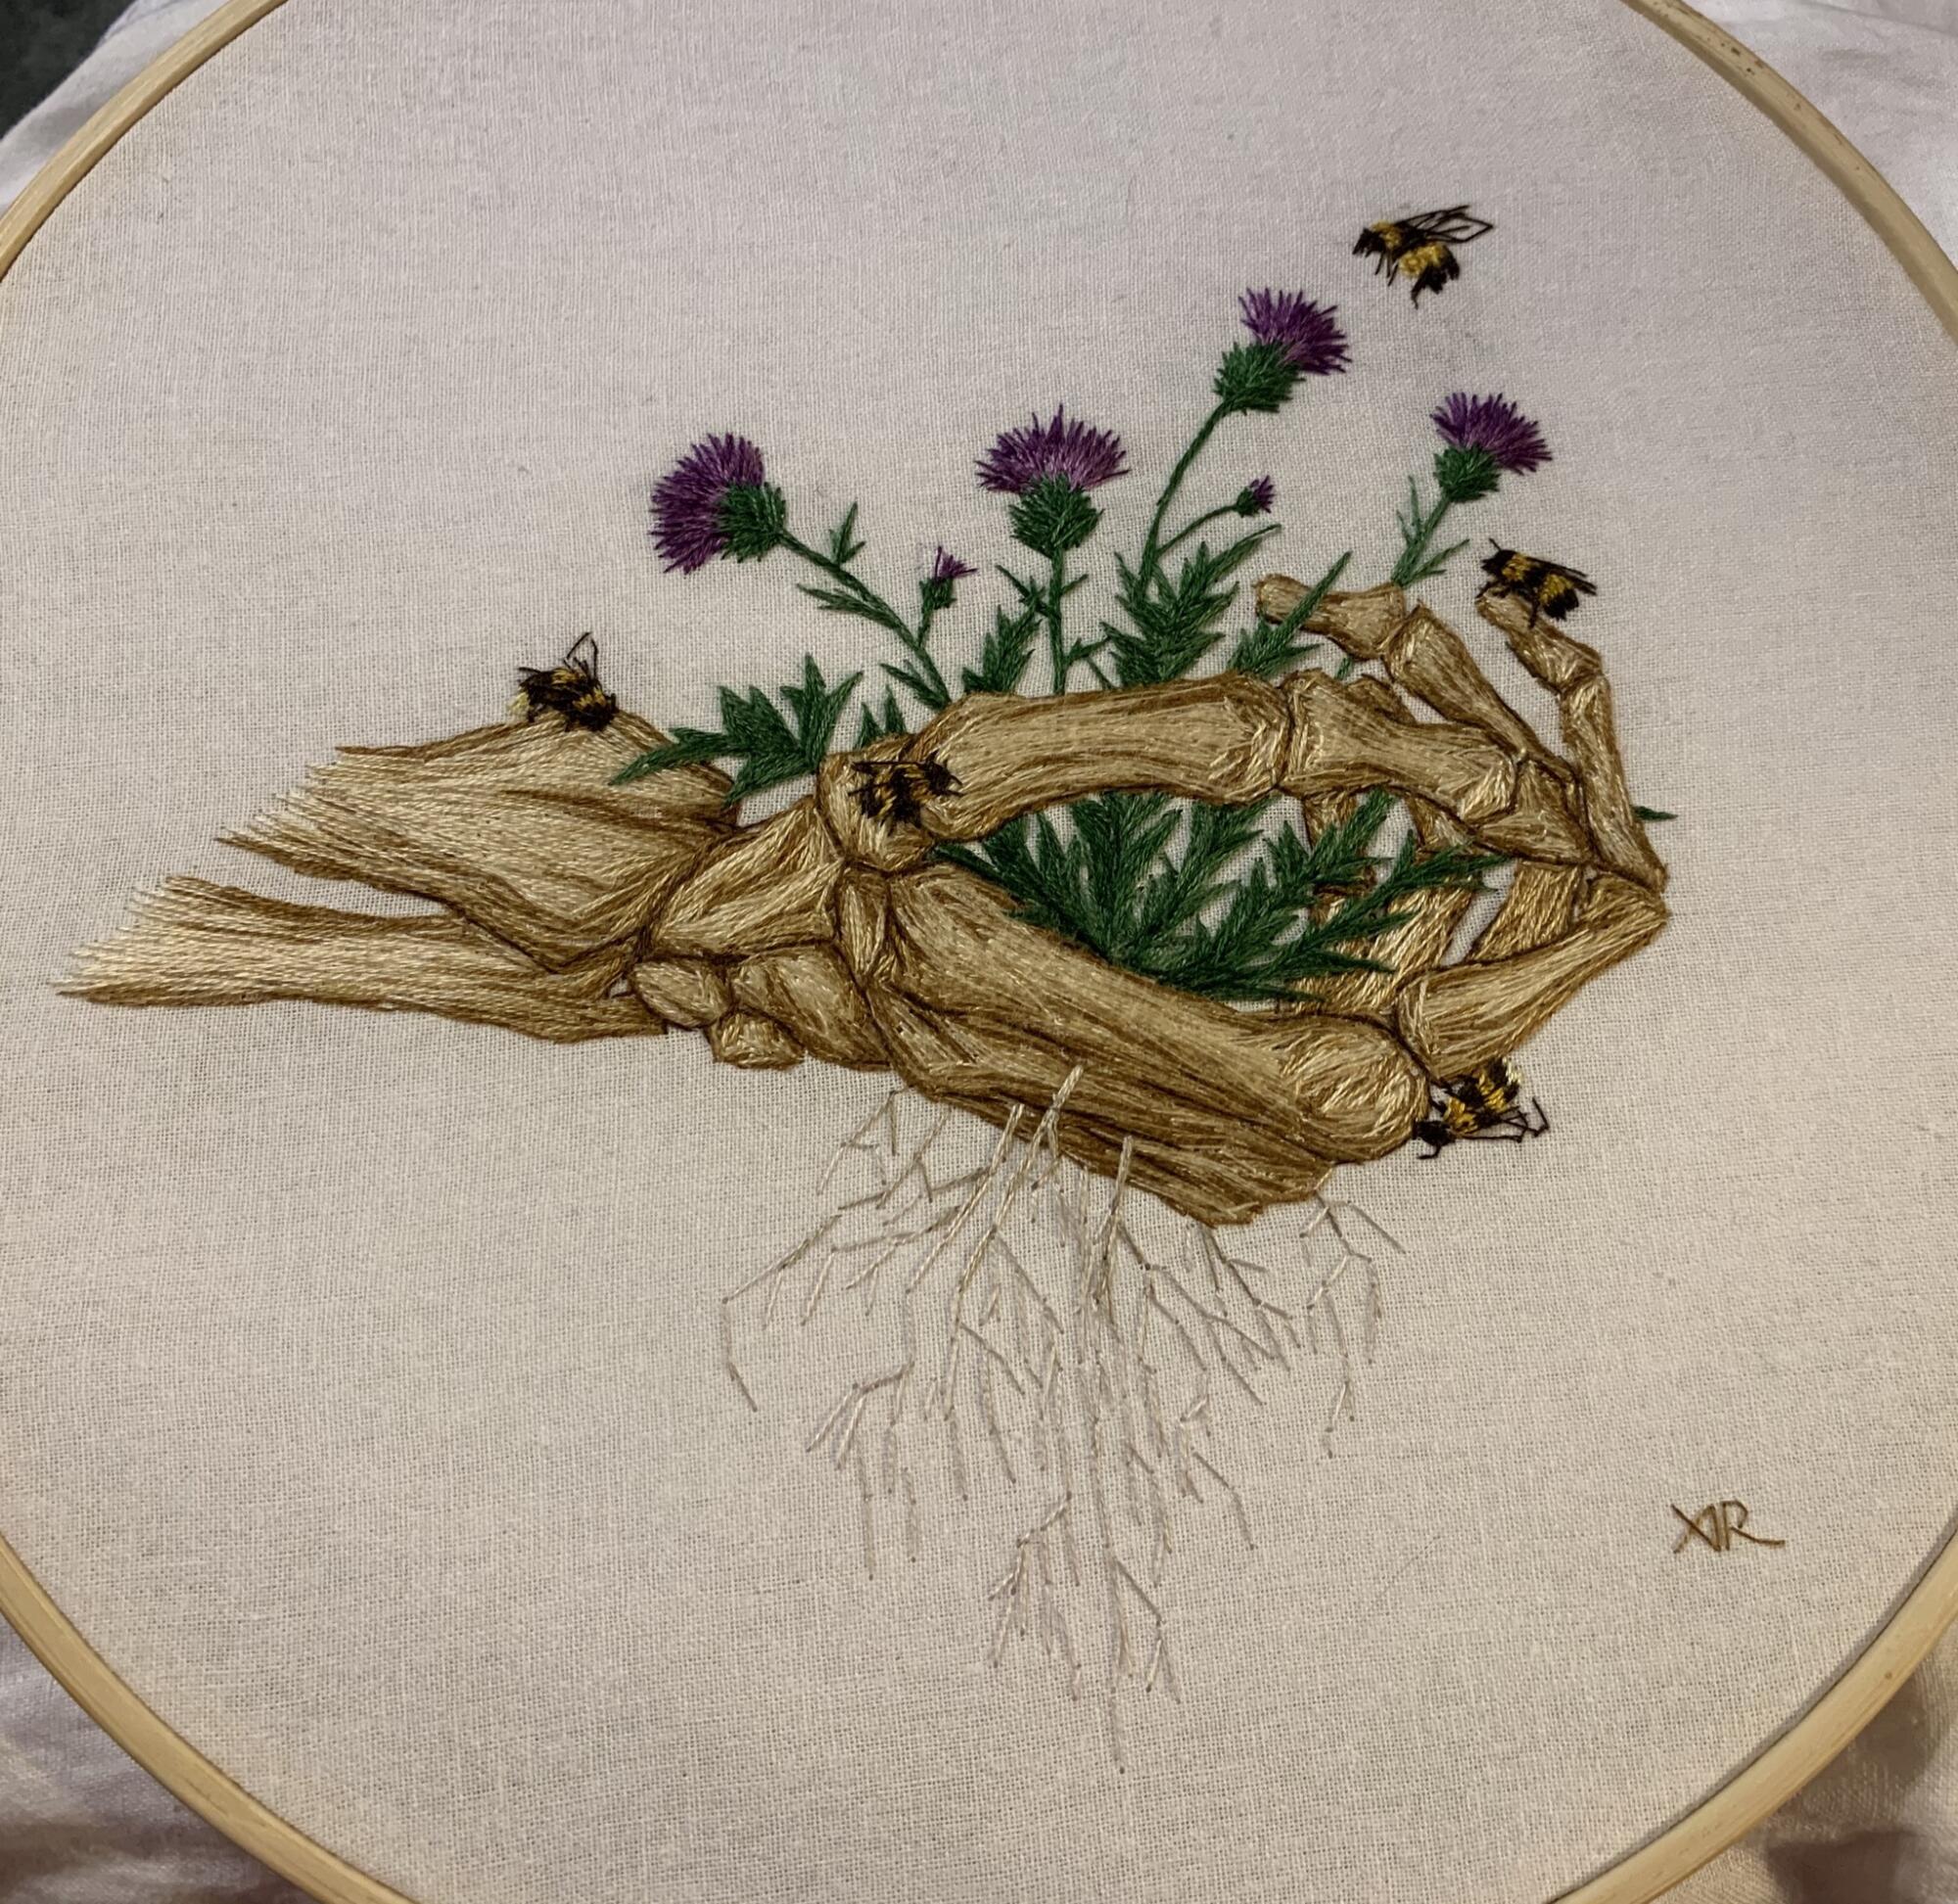 A needlework piece showing a skeletal hand with flowers growing out of it